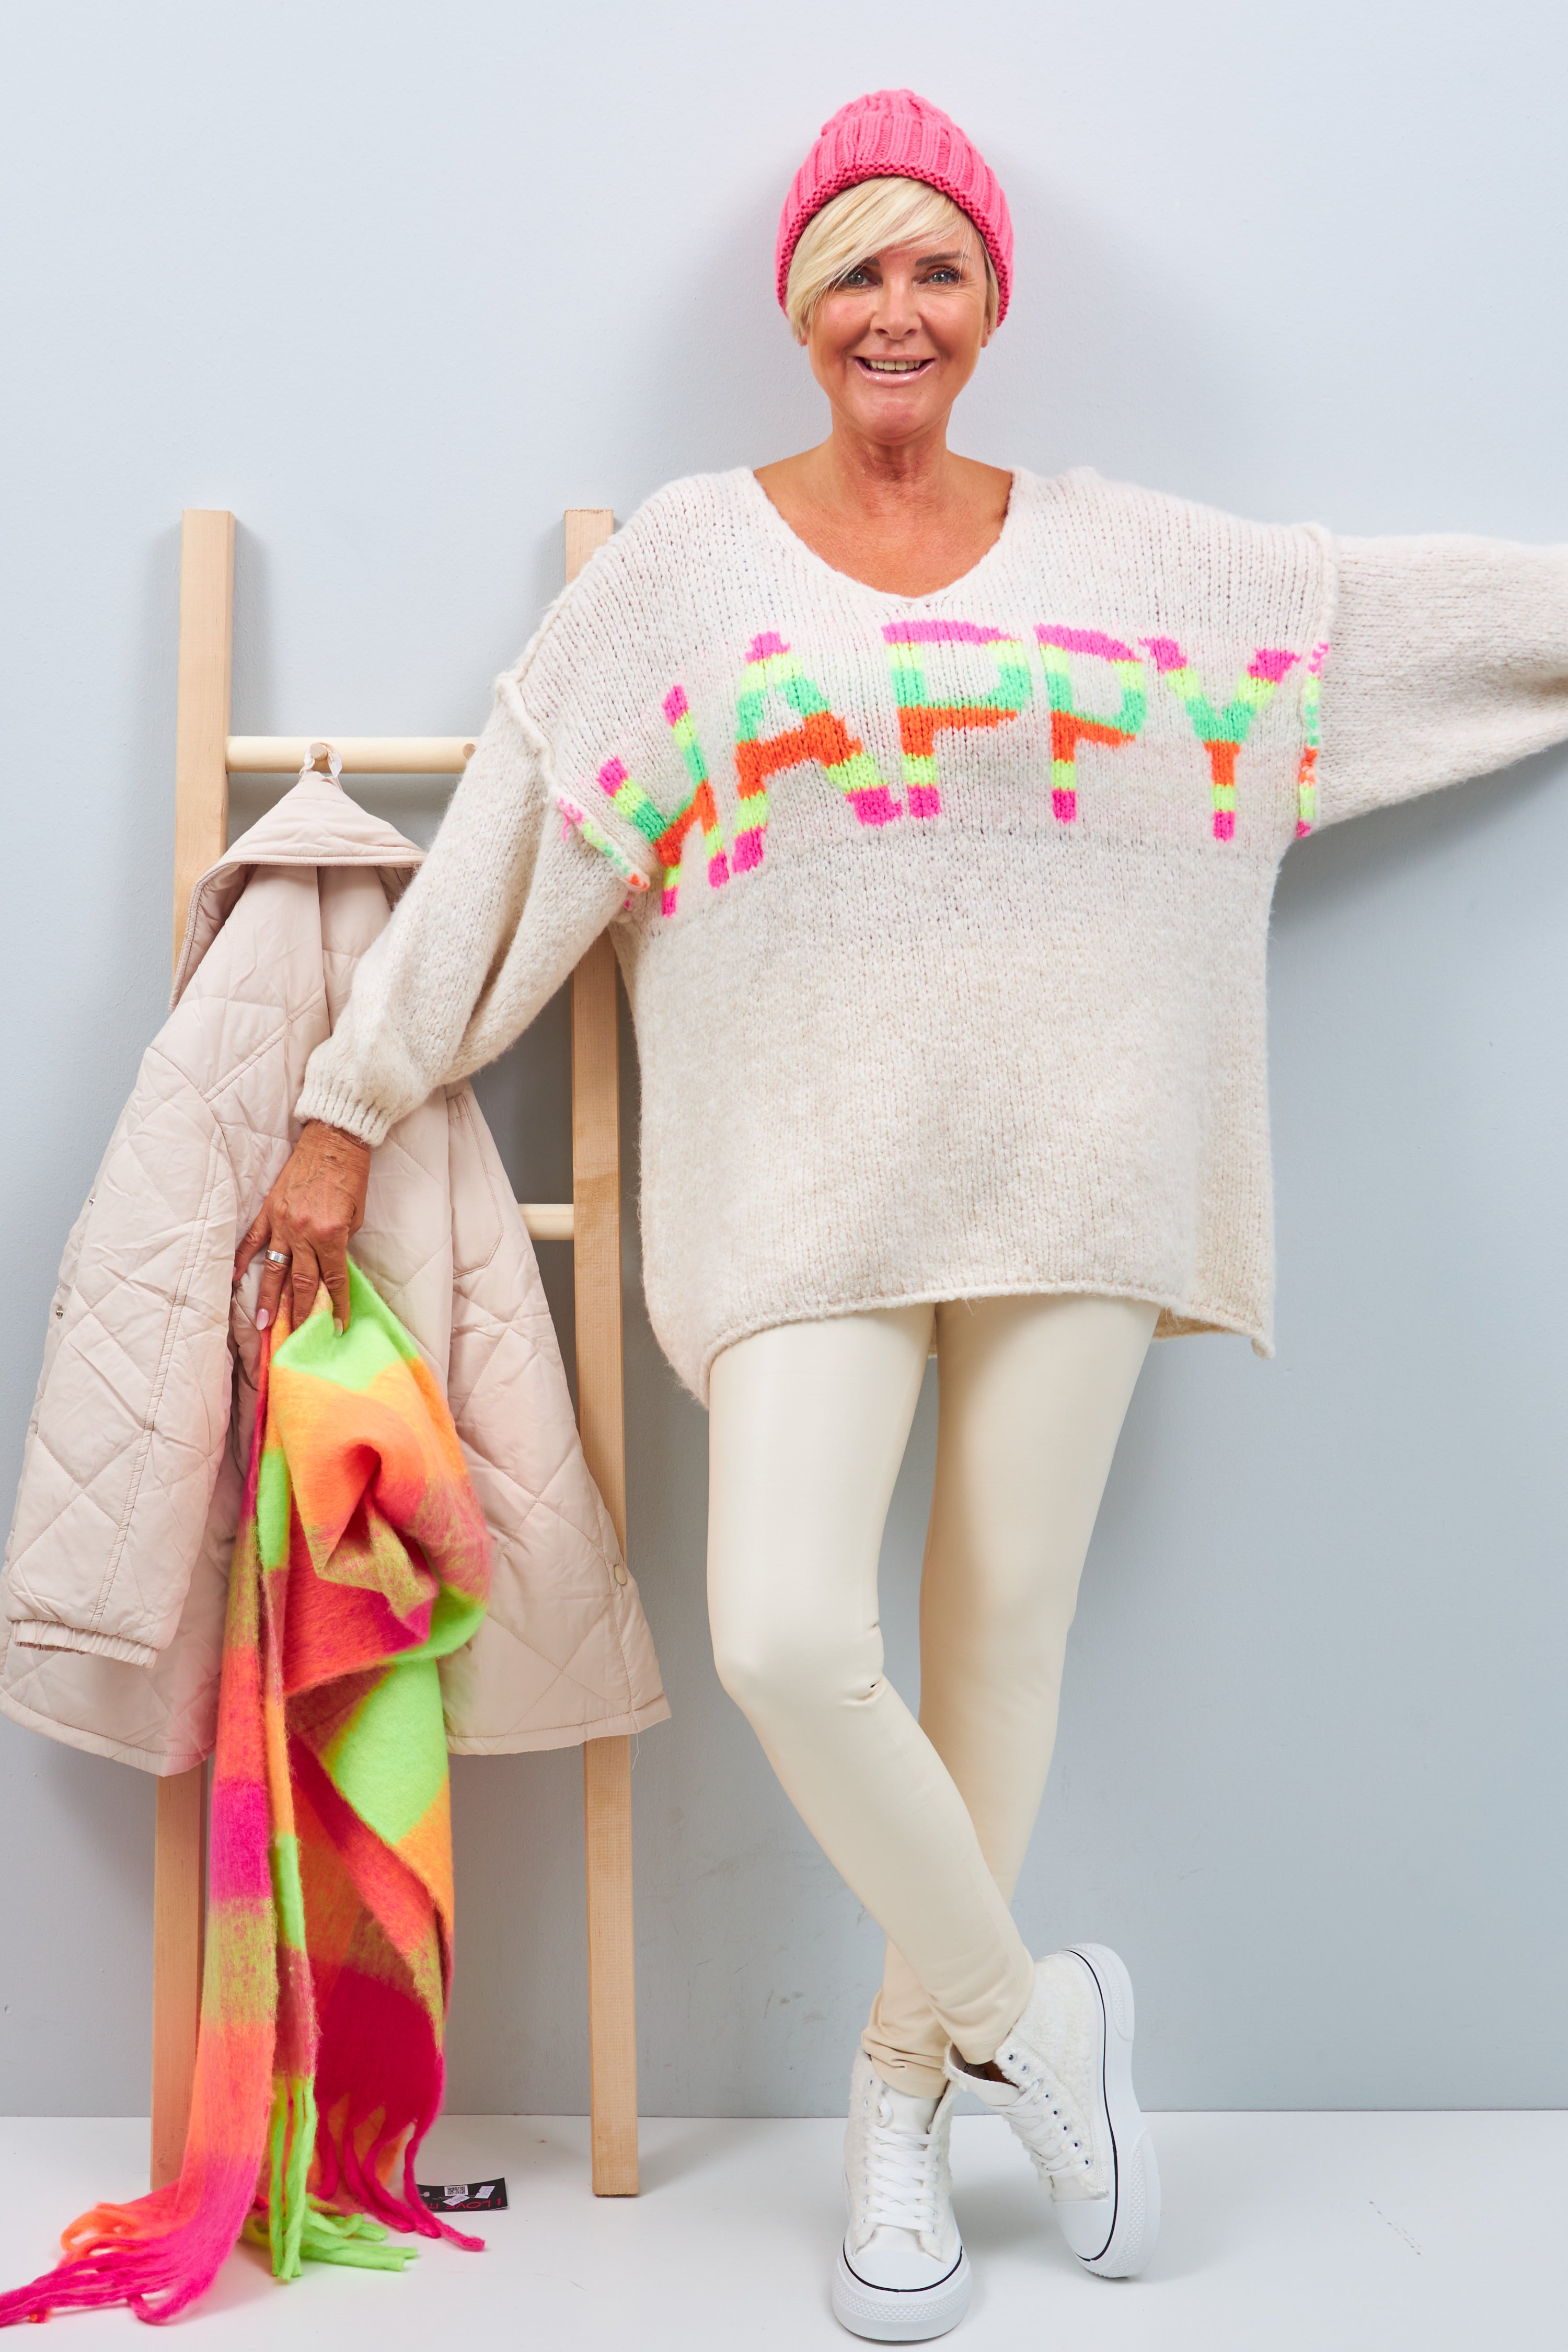 Knitted sweater with "HAPPY" lettering, beige-colored